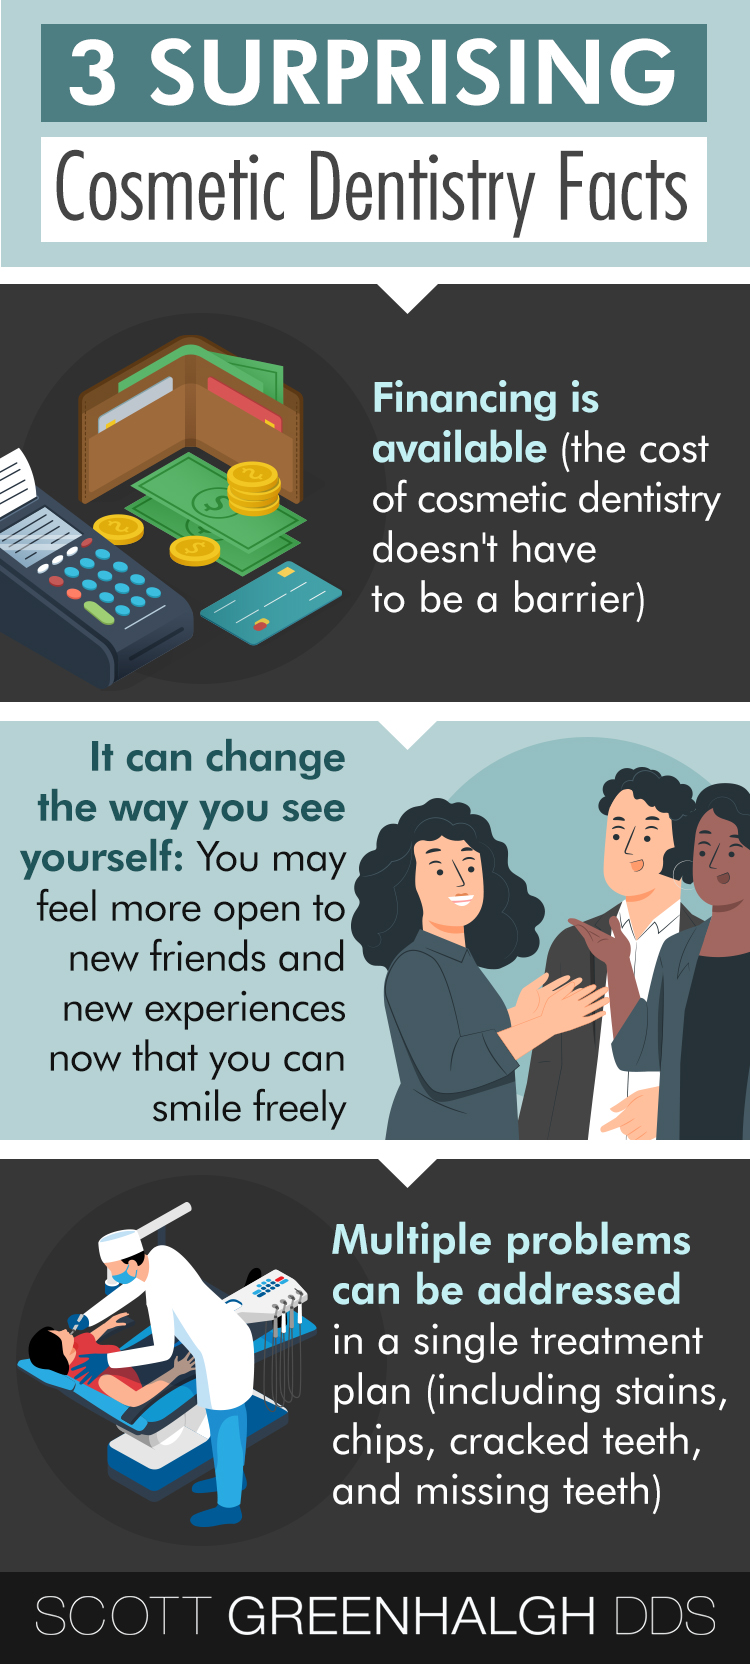 An infographic showing some of the benefits of cosmetic dentistry